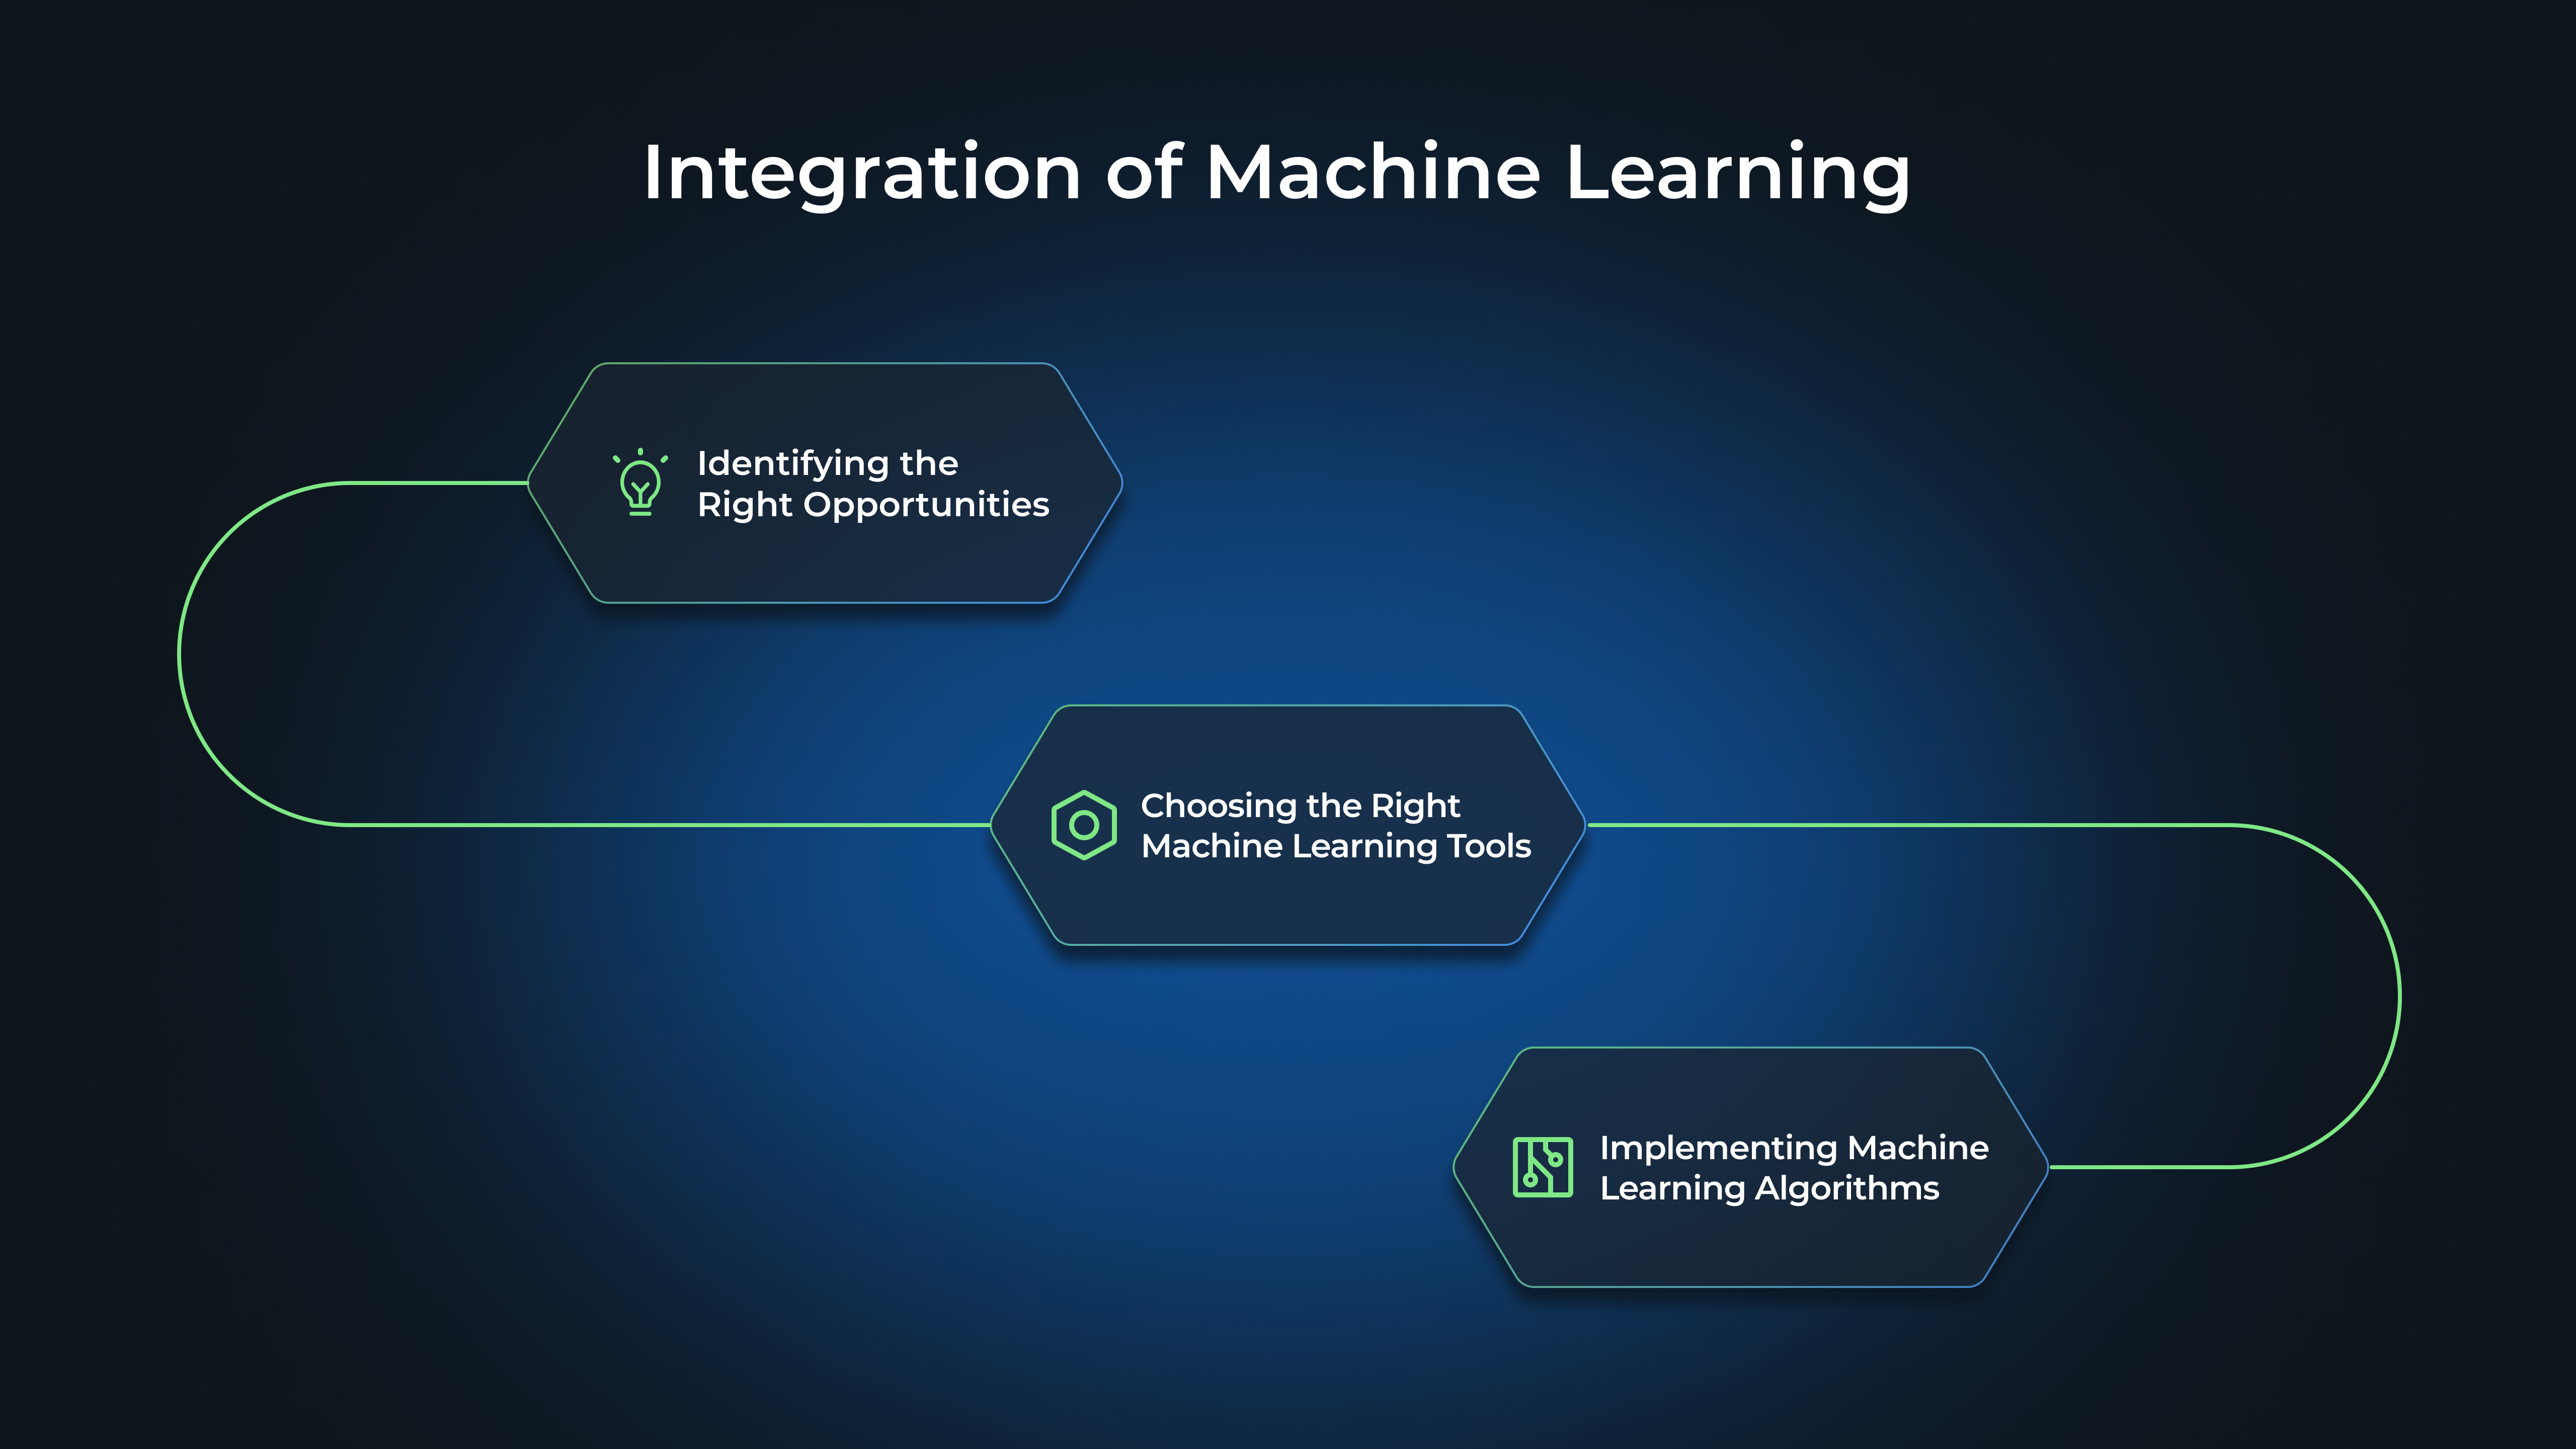 Integration of Machine Learning: Identifying the Right Opportunities, Choosing the Right Machine Learning Tools, Implementing Machine Learning Algorithms
